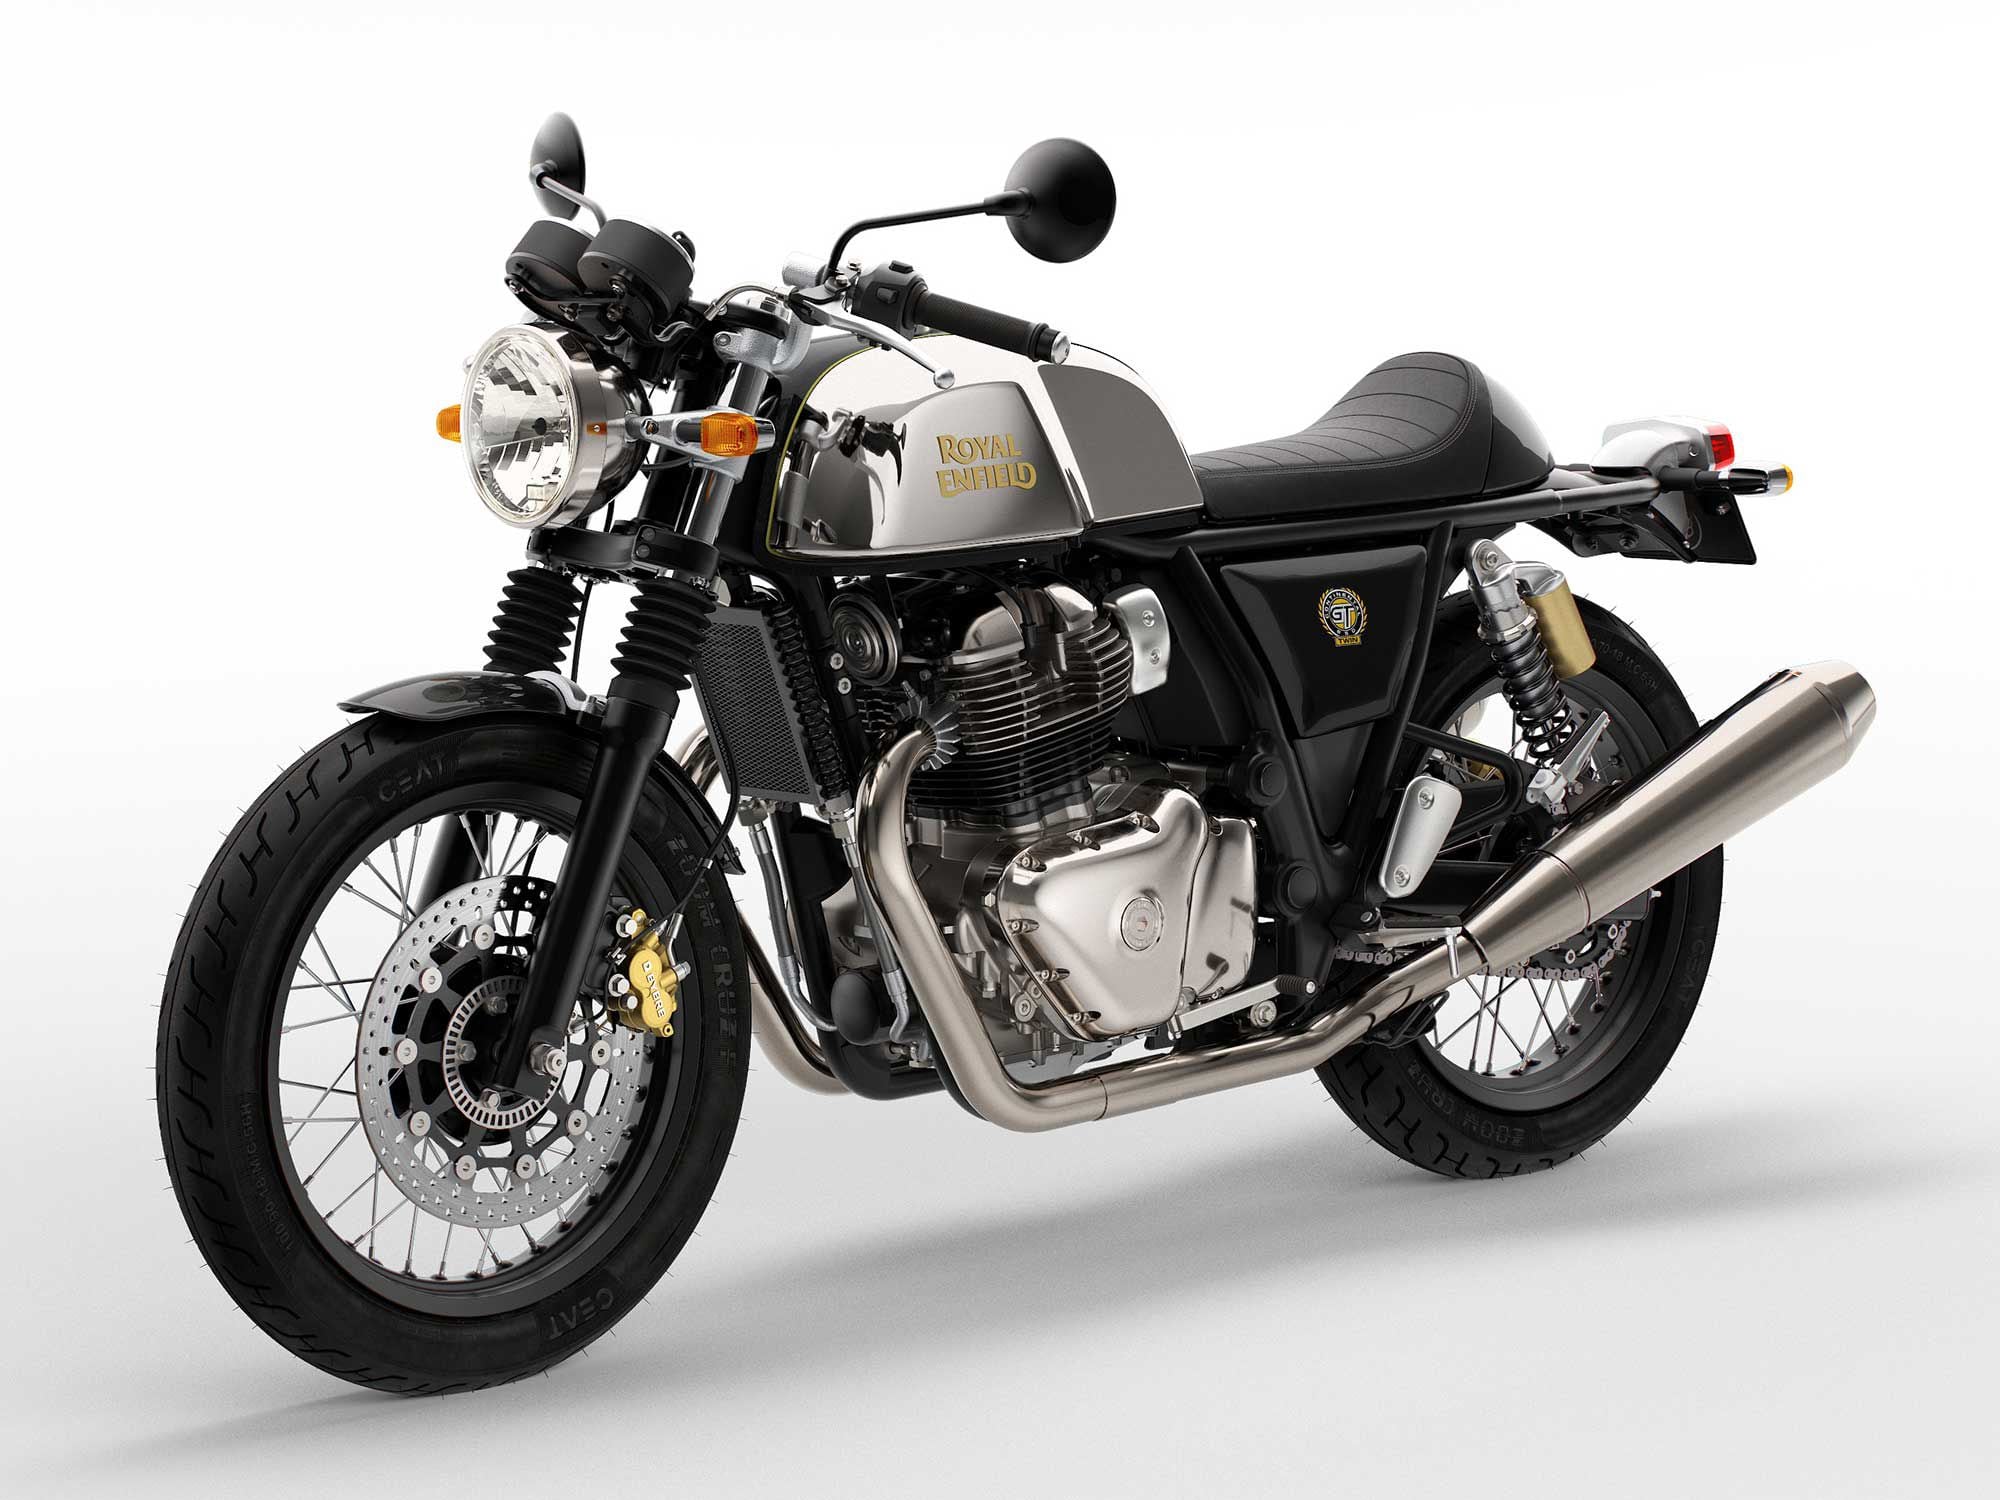 2022 Royal Enfield Continental GT 650 Motorbike news The Motorbike